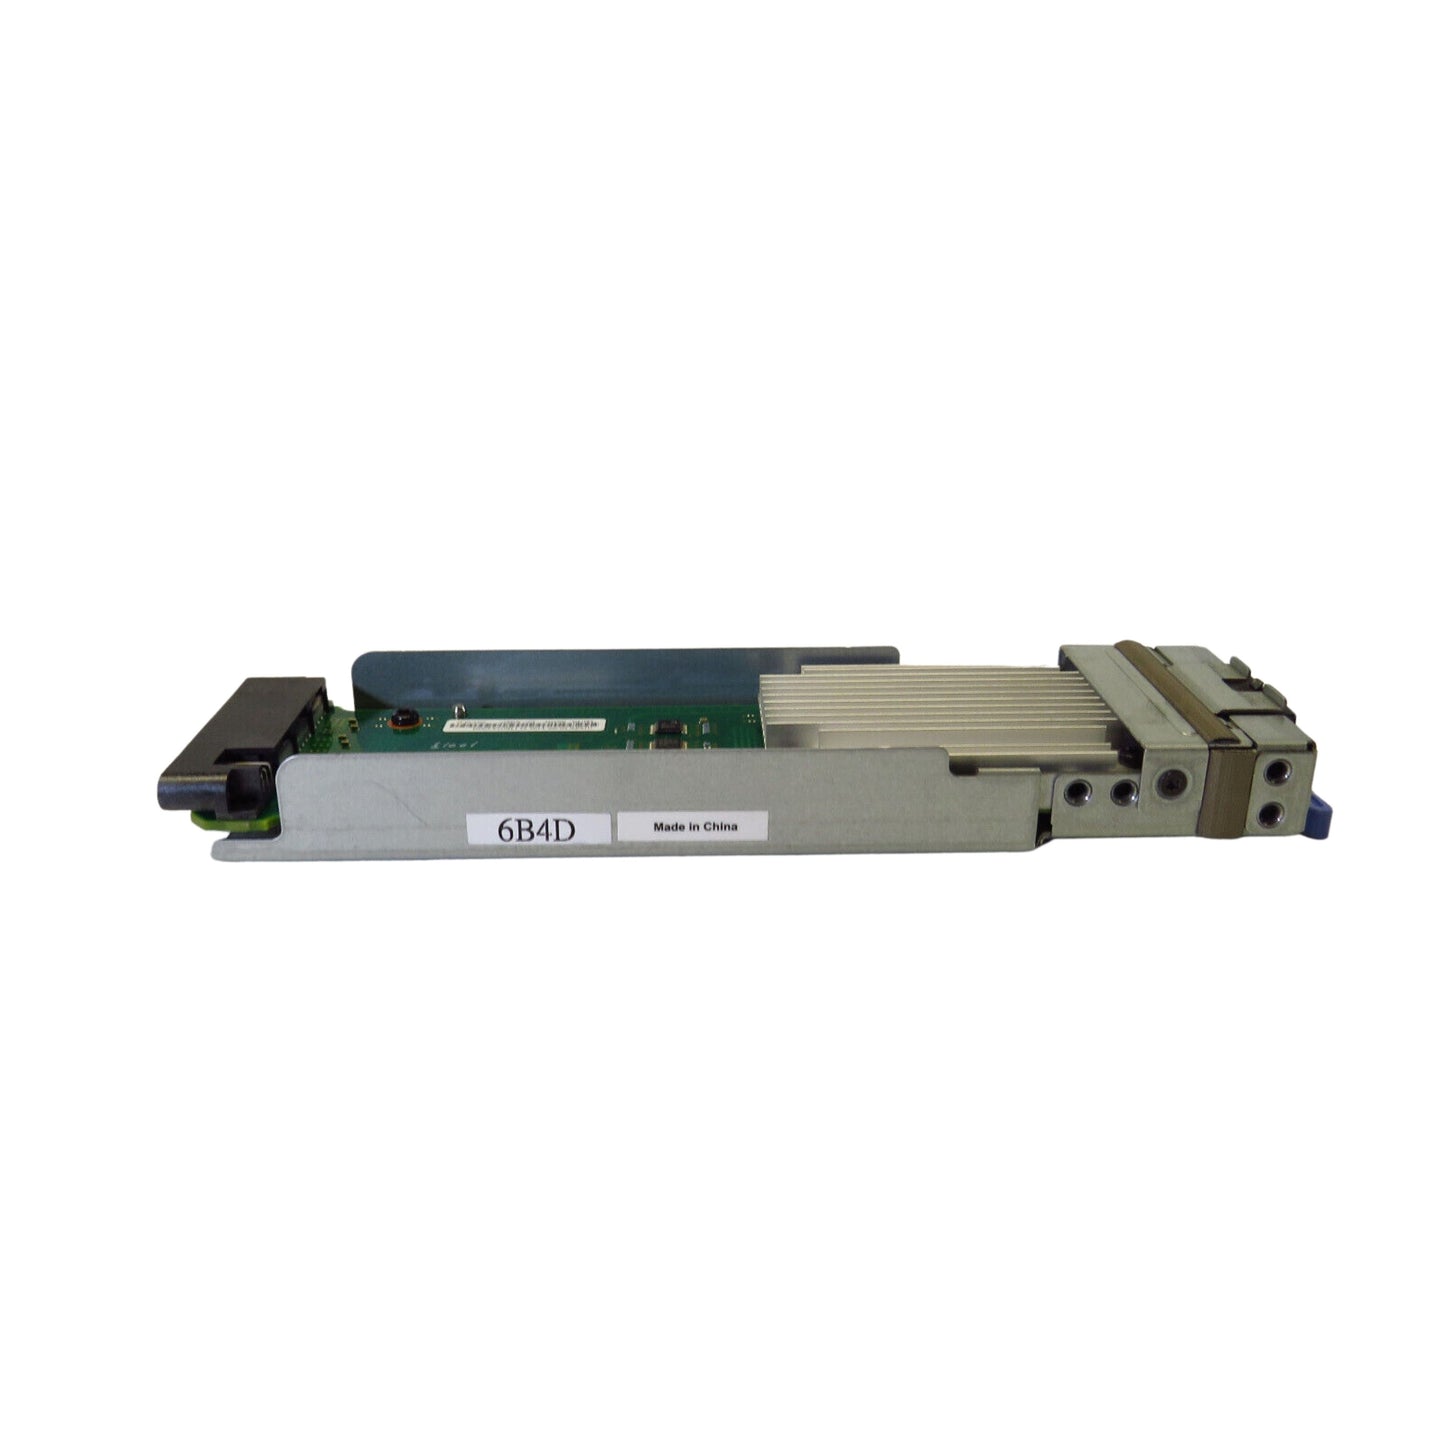 IBM 00E2344 00LY104 6B4D System Controller Unit Power Interface Card (Refurbished)